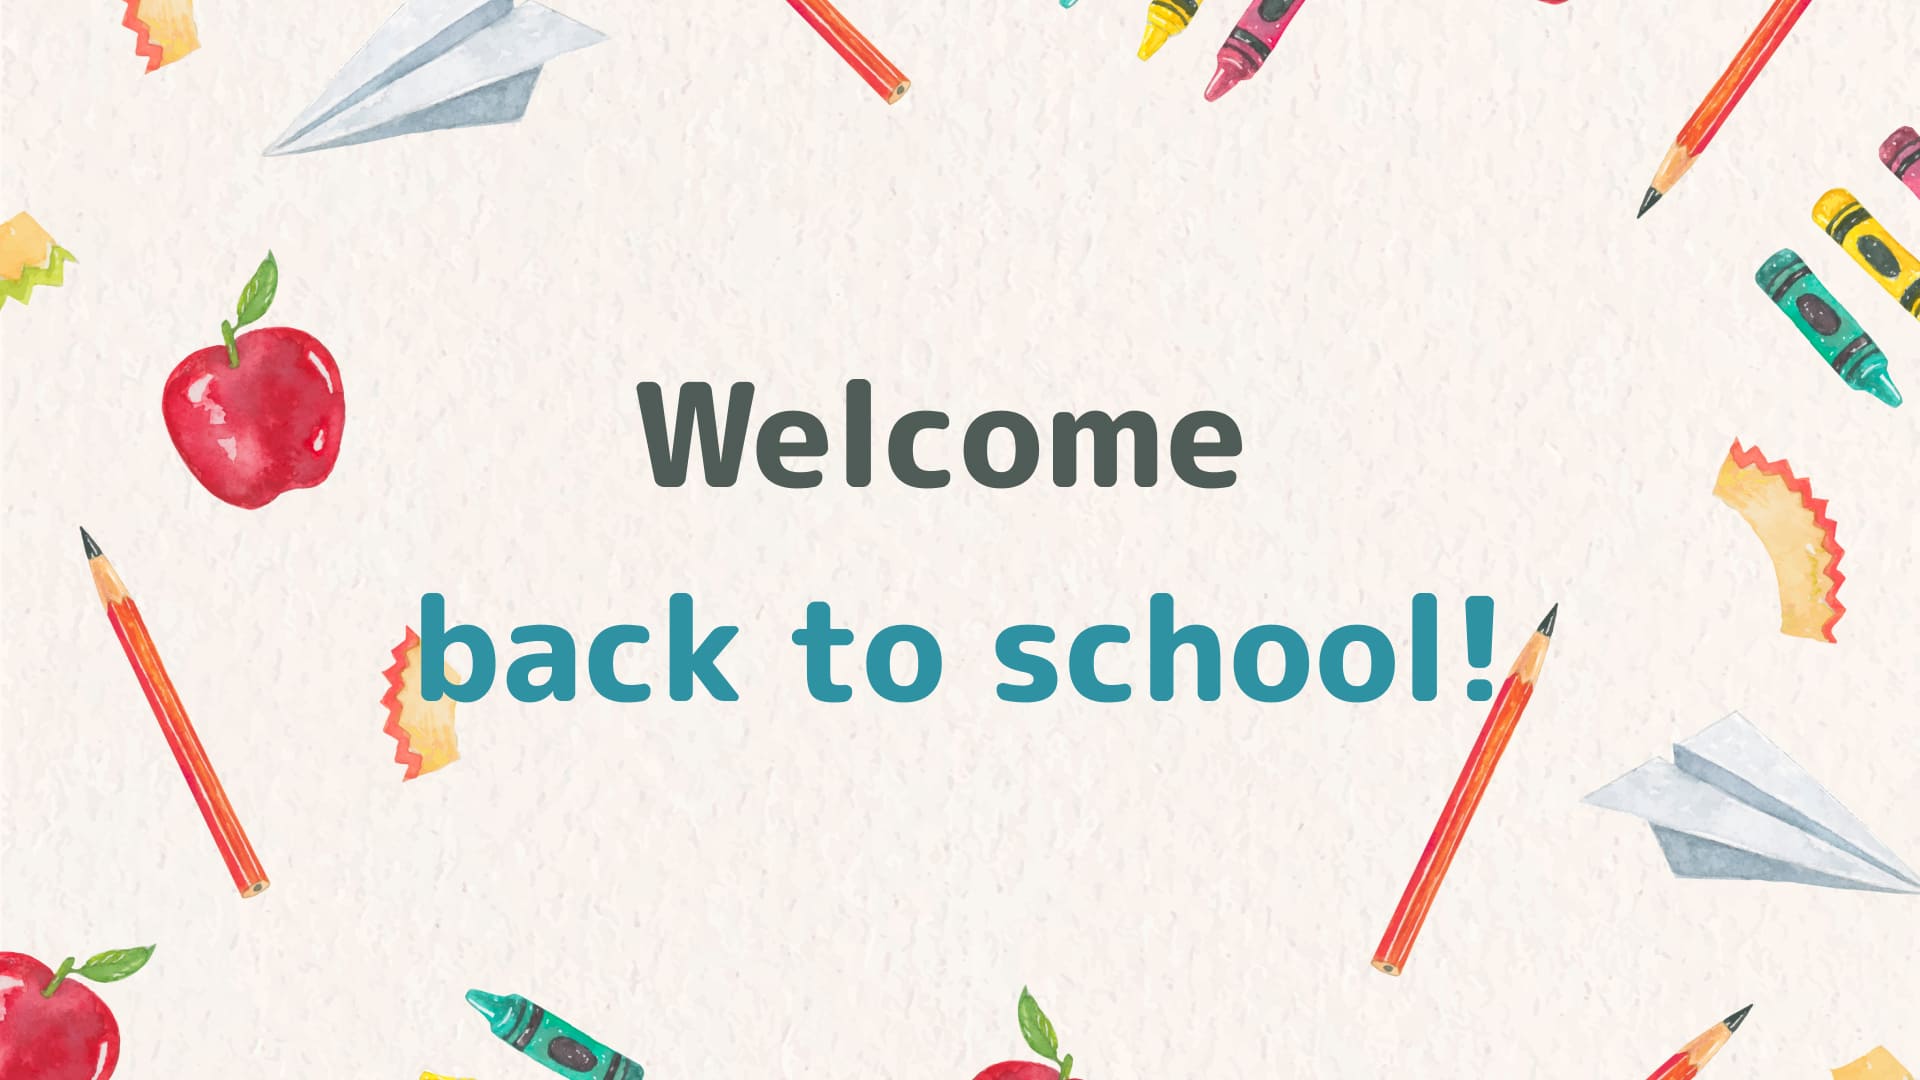 1 Preview Back to School Powerpoint Background Free.